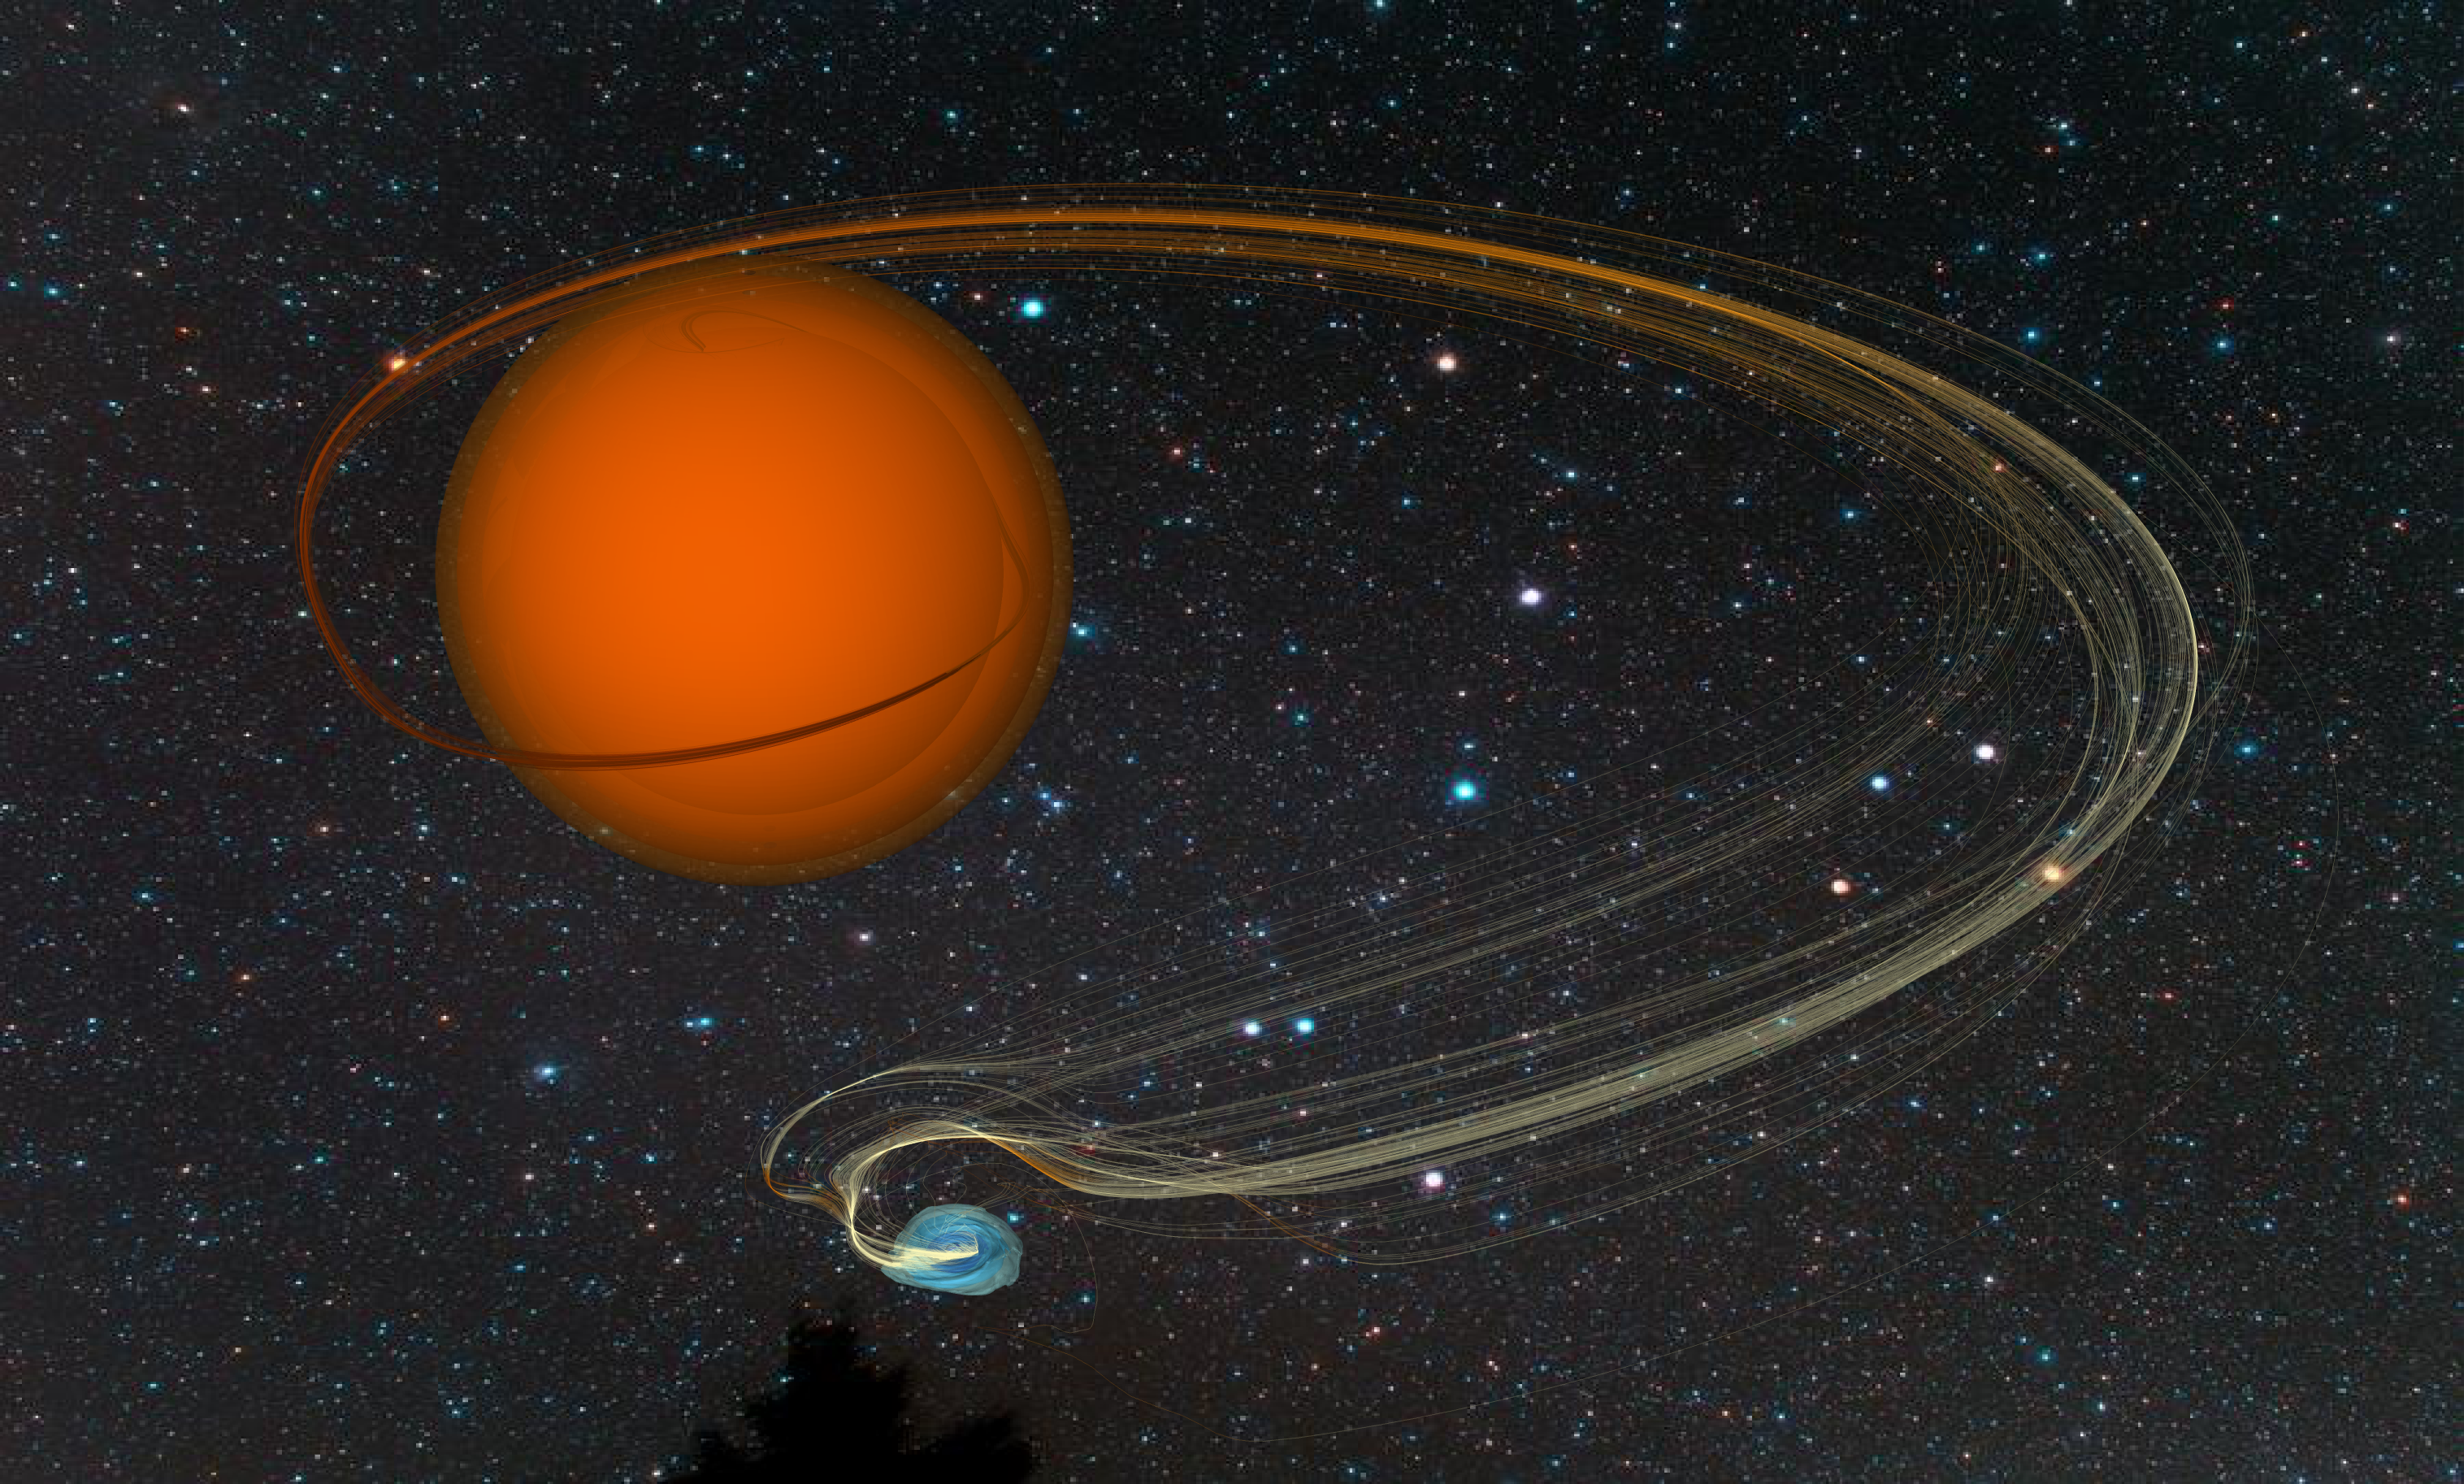 
An artistic impression based on a computer simulation of the <a href="https://www.sdss4.org/press-releases/a-giant-meal-for-a-dwarf/">Draco C1 symbiotic binary star system</a> showing material flowing off the red giant star onto the white dwarf. These systems are the progenitors of some types of supernovae.
Image credit: John Blondin, North Carolina State University; See <a href="https://ui.adsabs.harvard.edu/abs/2020ApJ...900L..43L/abstract" class="broken_link">Lewis et al. 2020</a>
